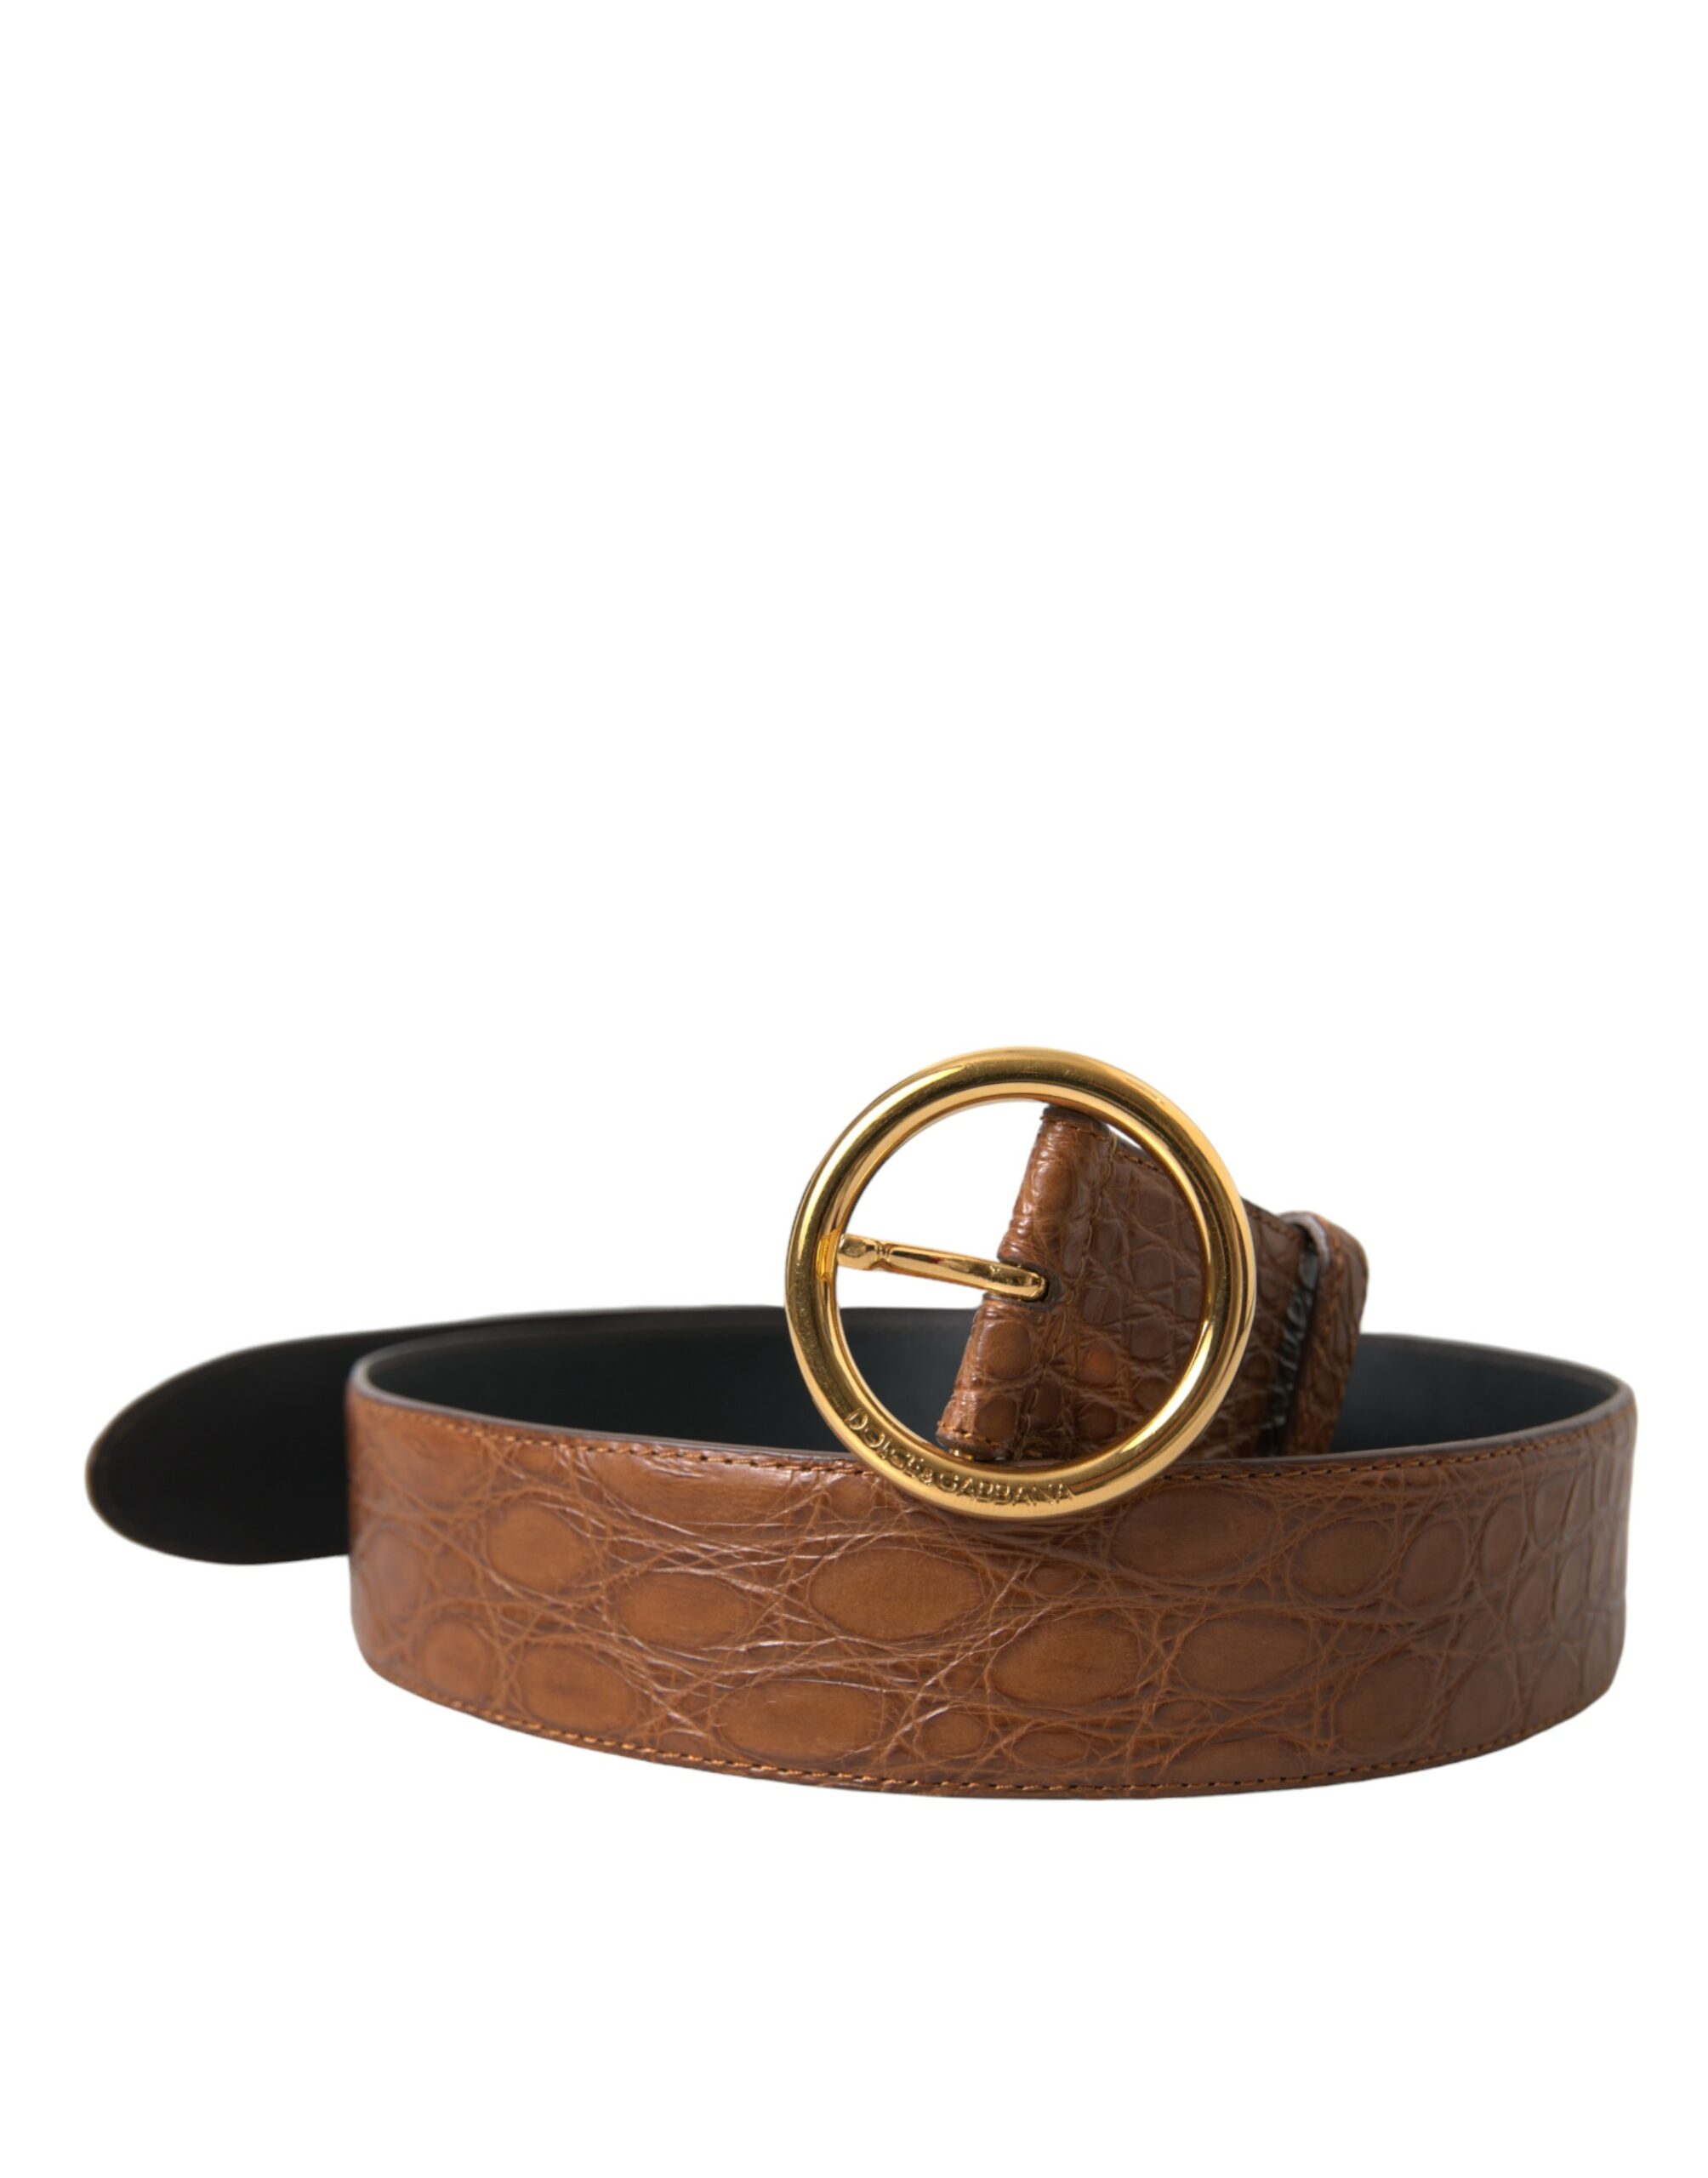 Brown Dolce & Gabbana Brown Exotic Leather Round Buckle Belt 95 cm / 38 Inches